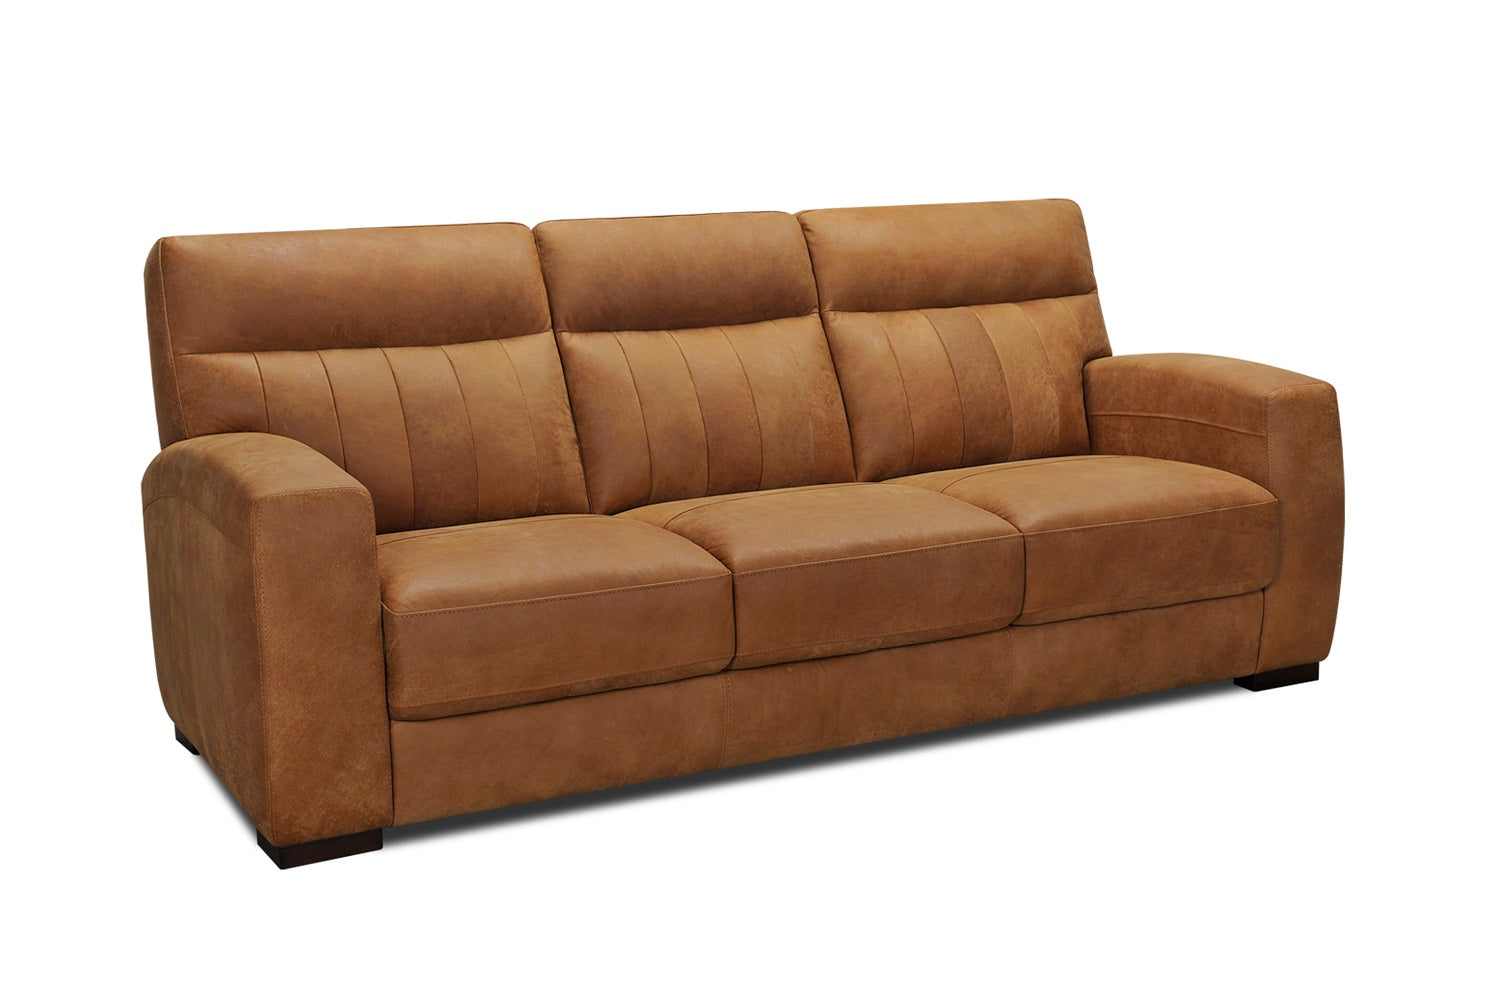 Bs32568 3 2 Seater Leather Sofa Suite